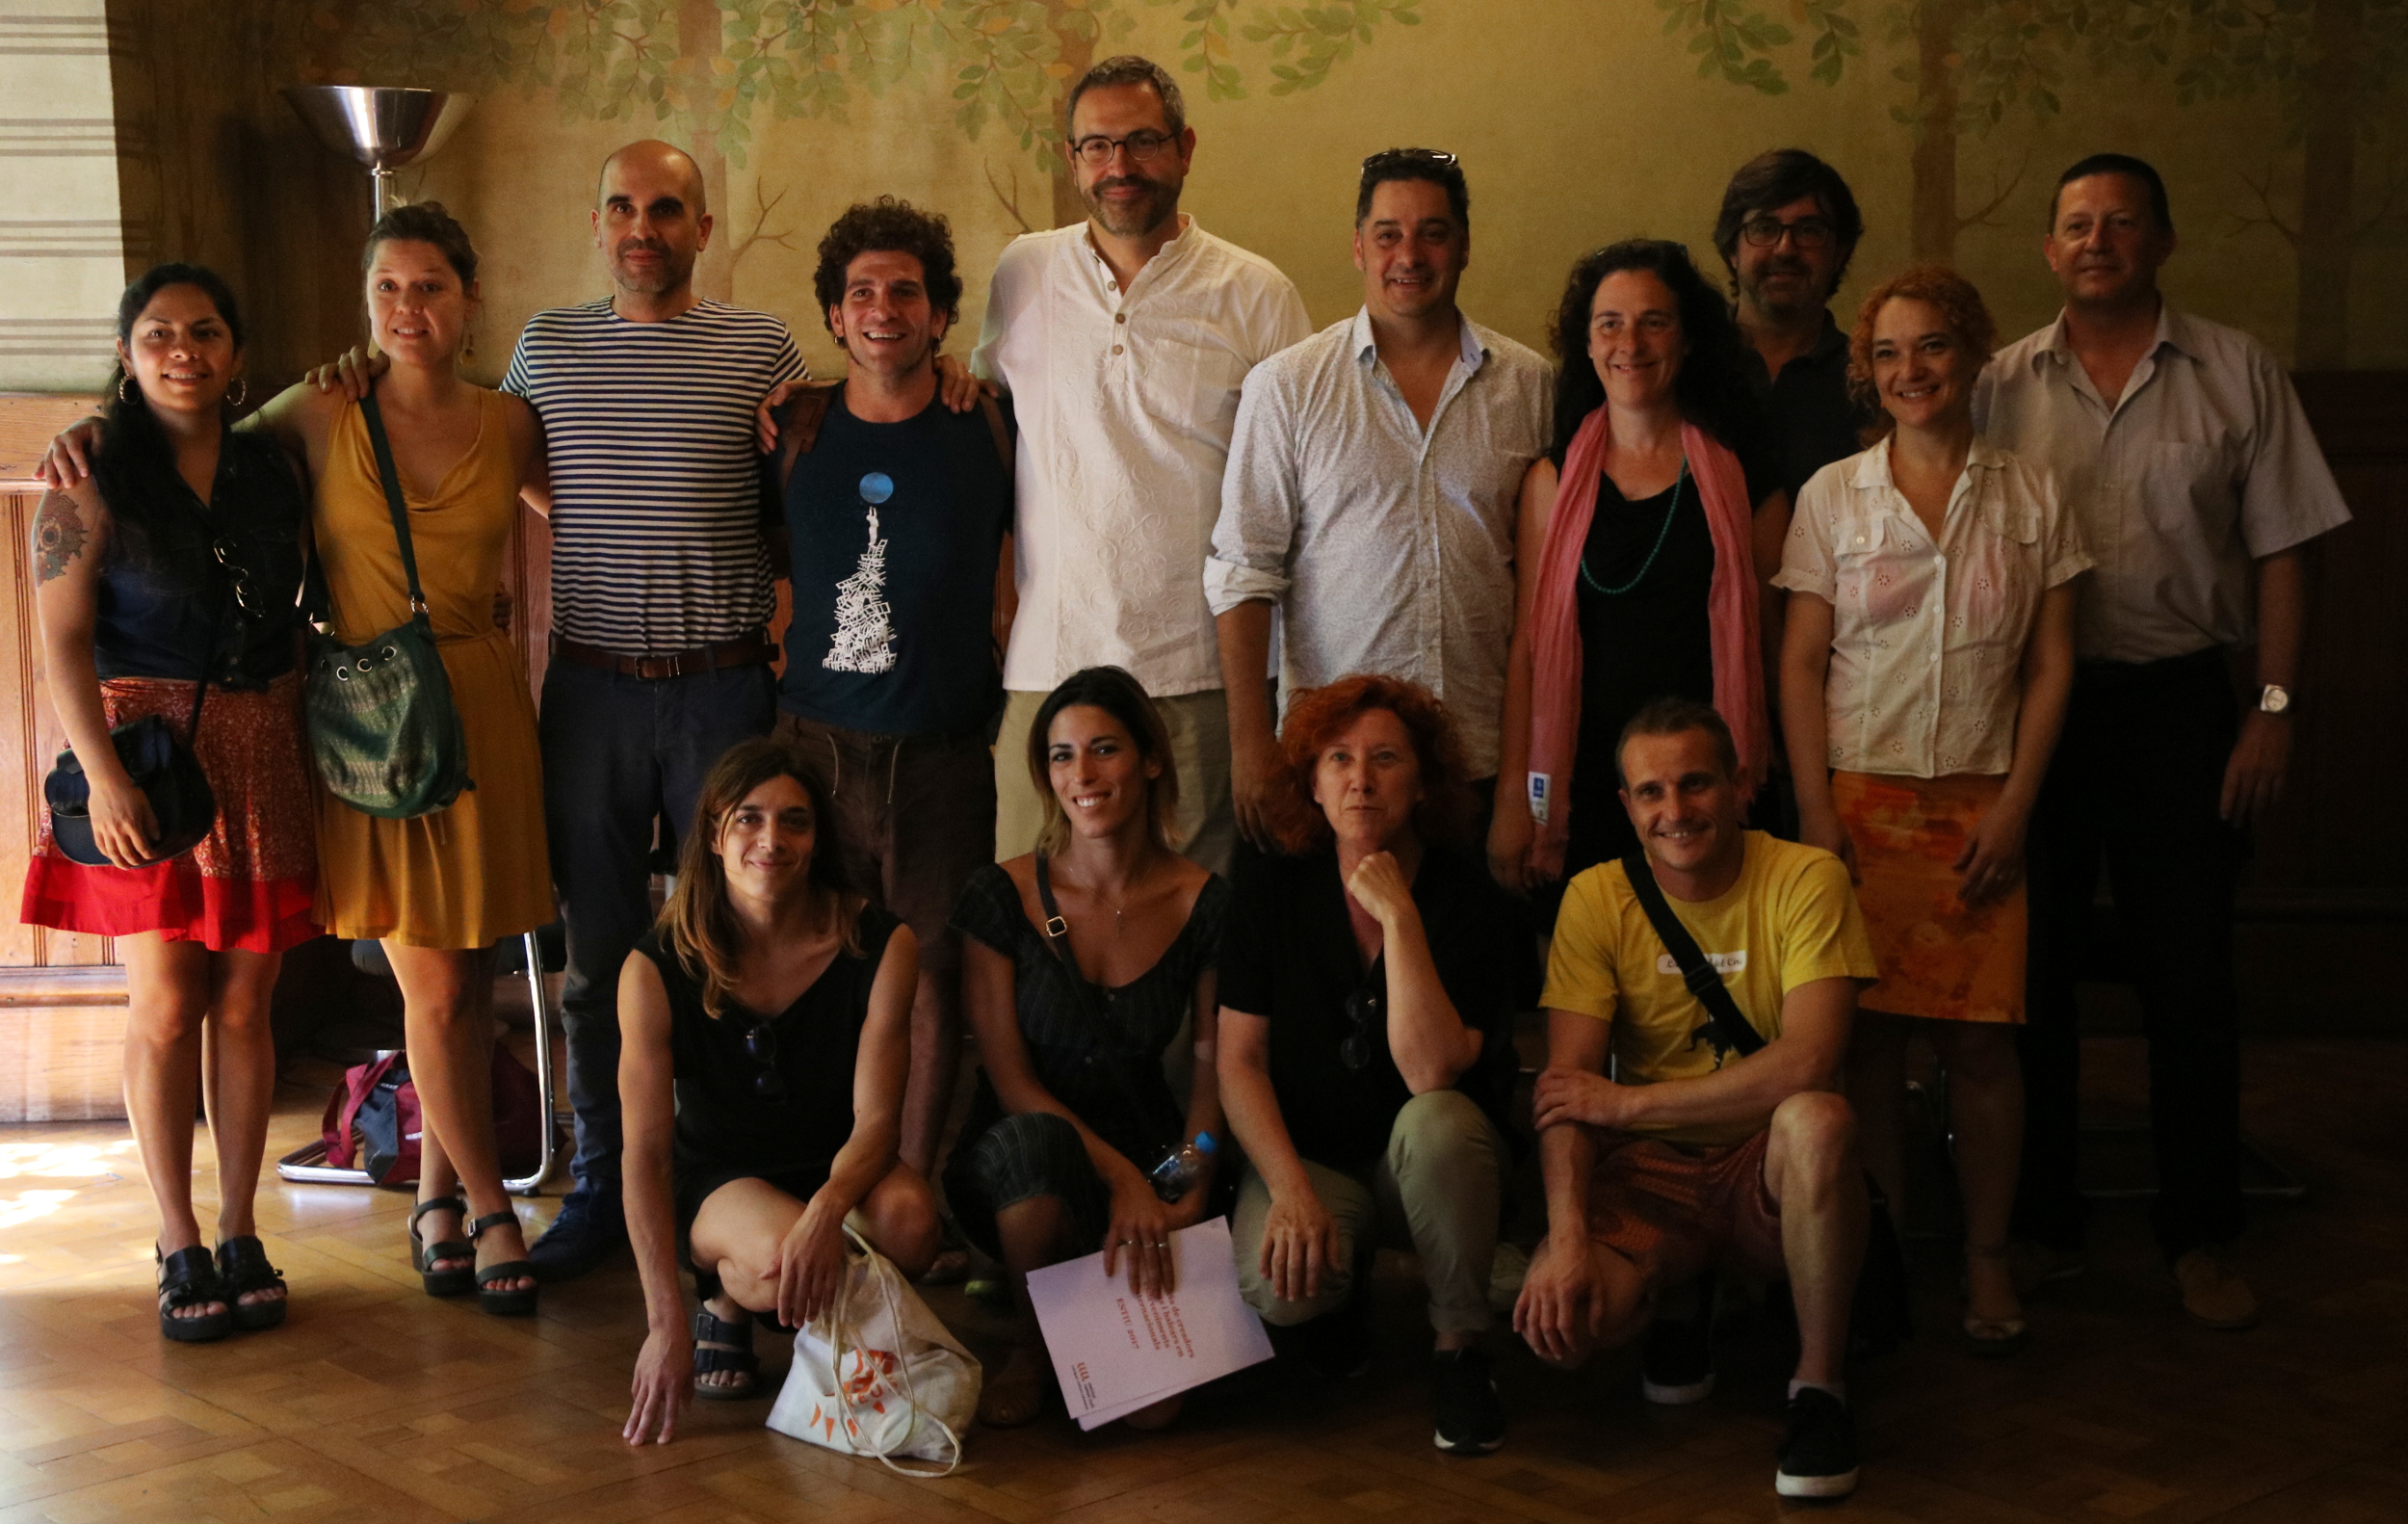 Group picture of representatives of the Ramon Llull Institute and Catalan artists